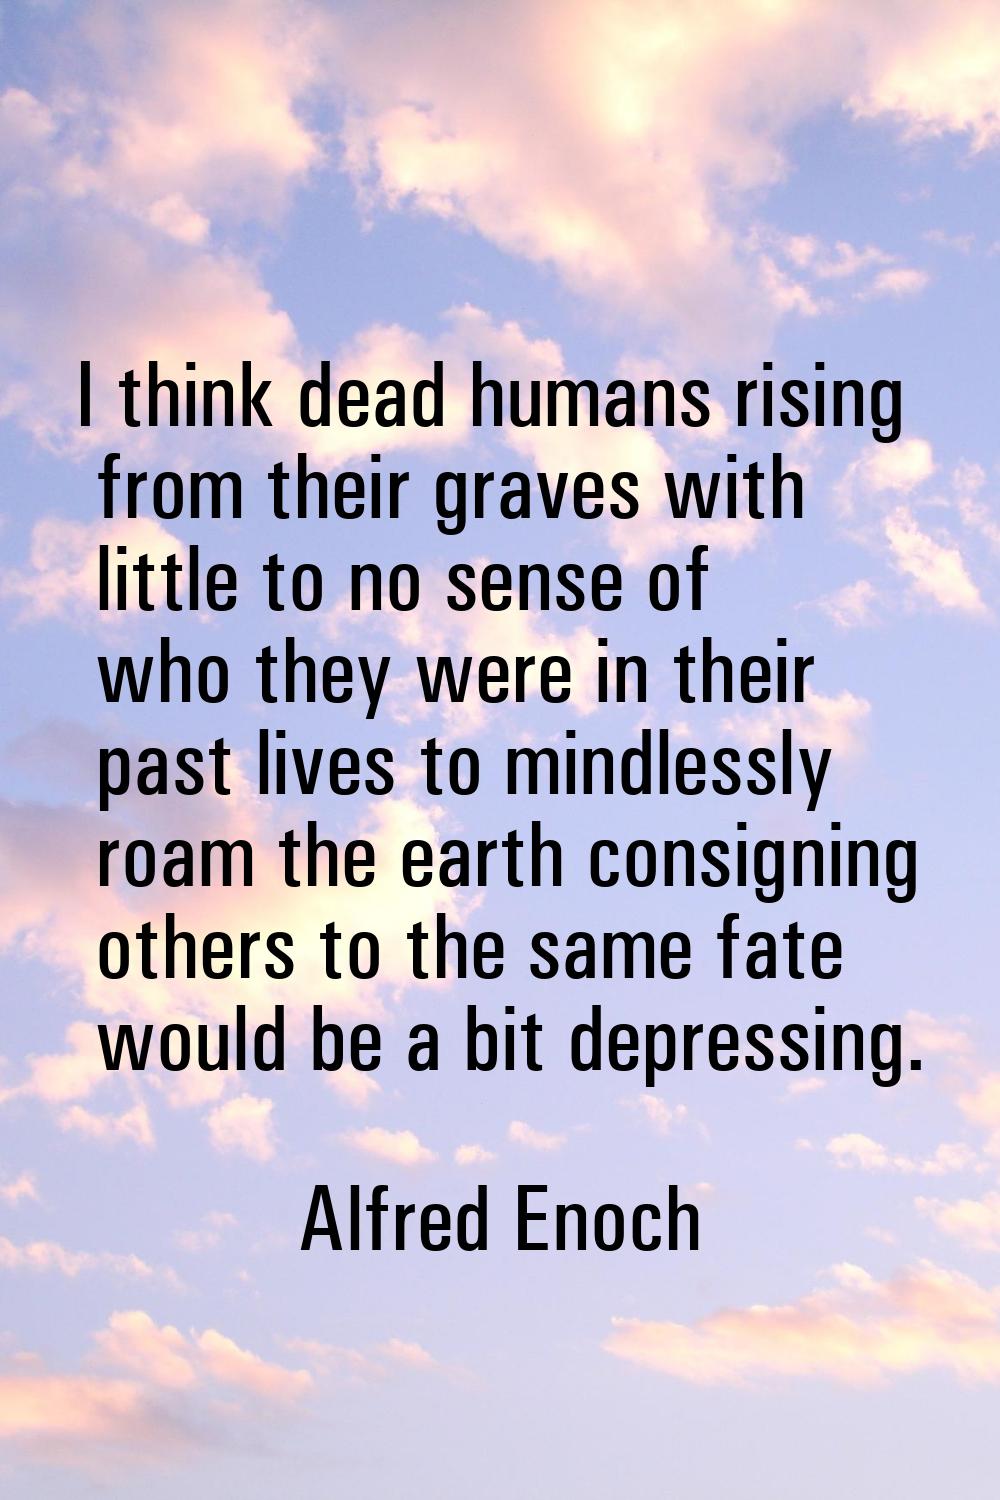 I think dead humans rising from their graves with little to no sense of who they were in their past